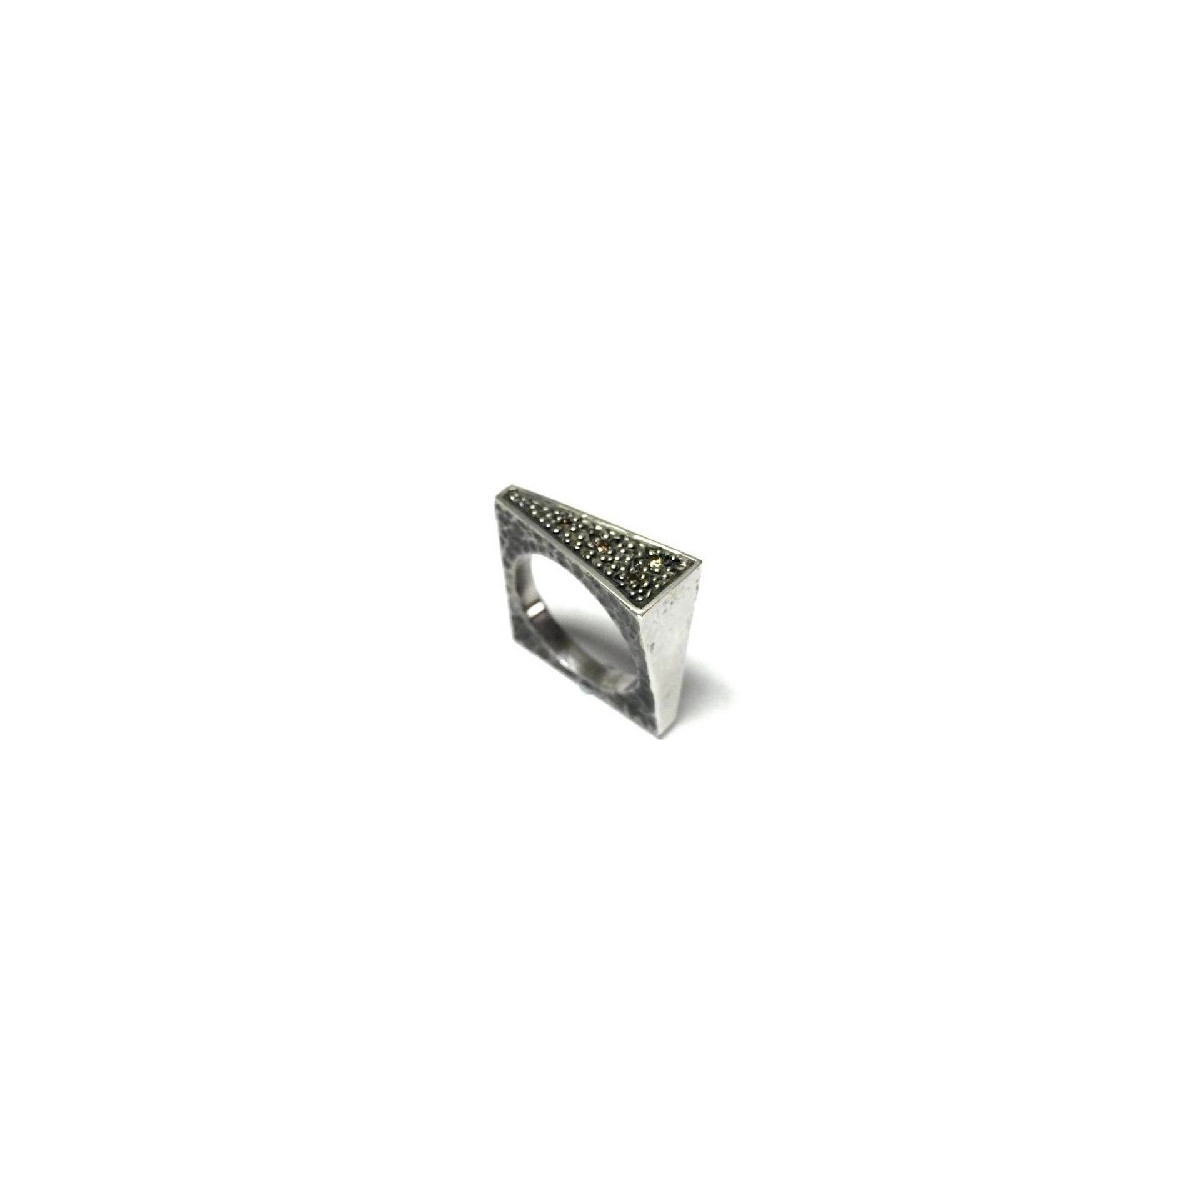 ANELL CLIMENT 1890 TRIANGLE  - S-6504-4/BM